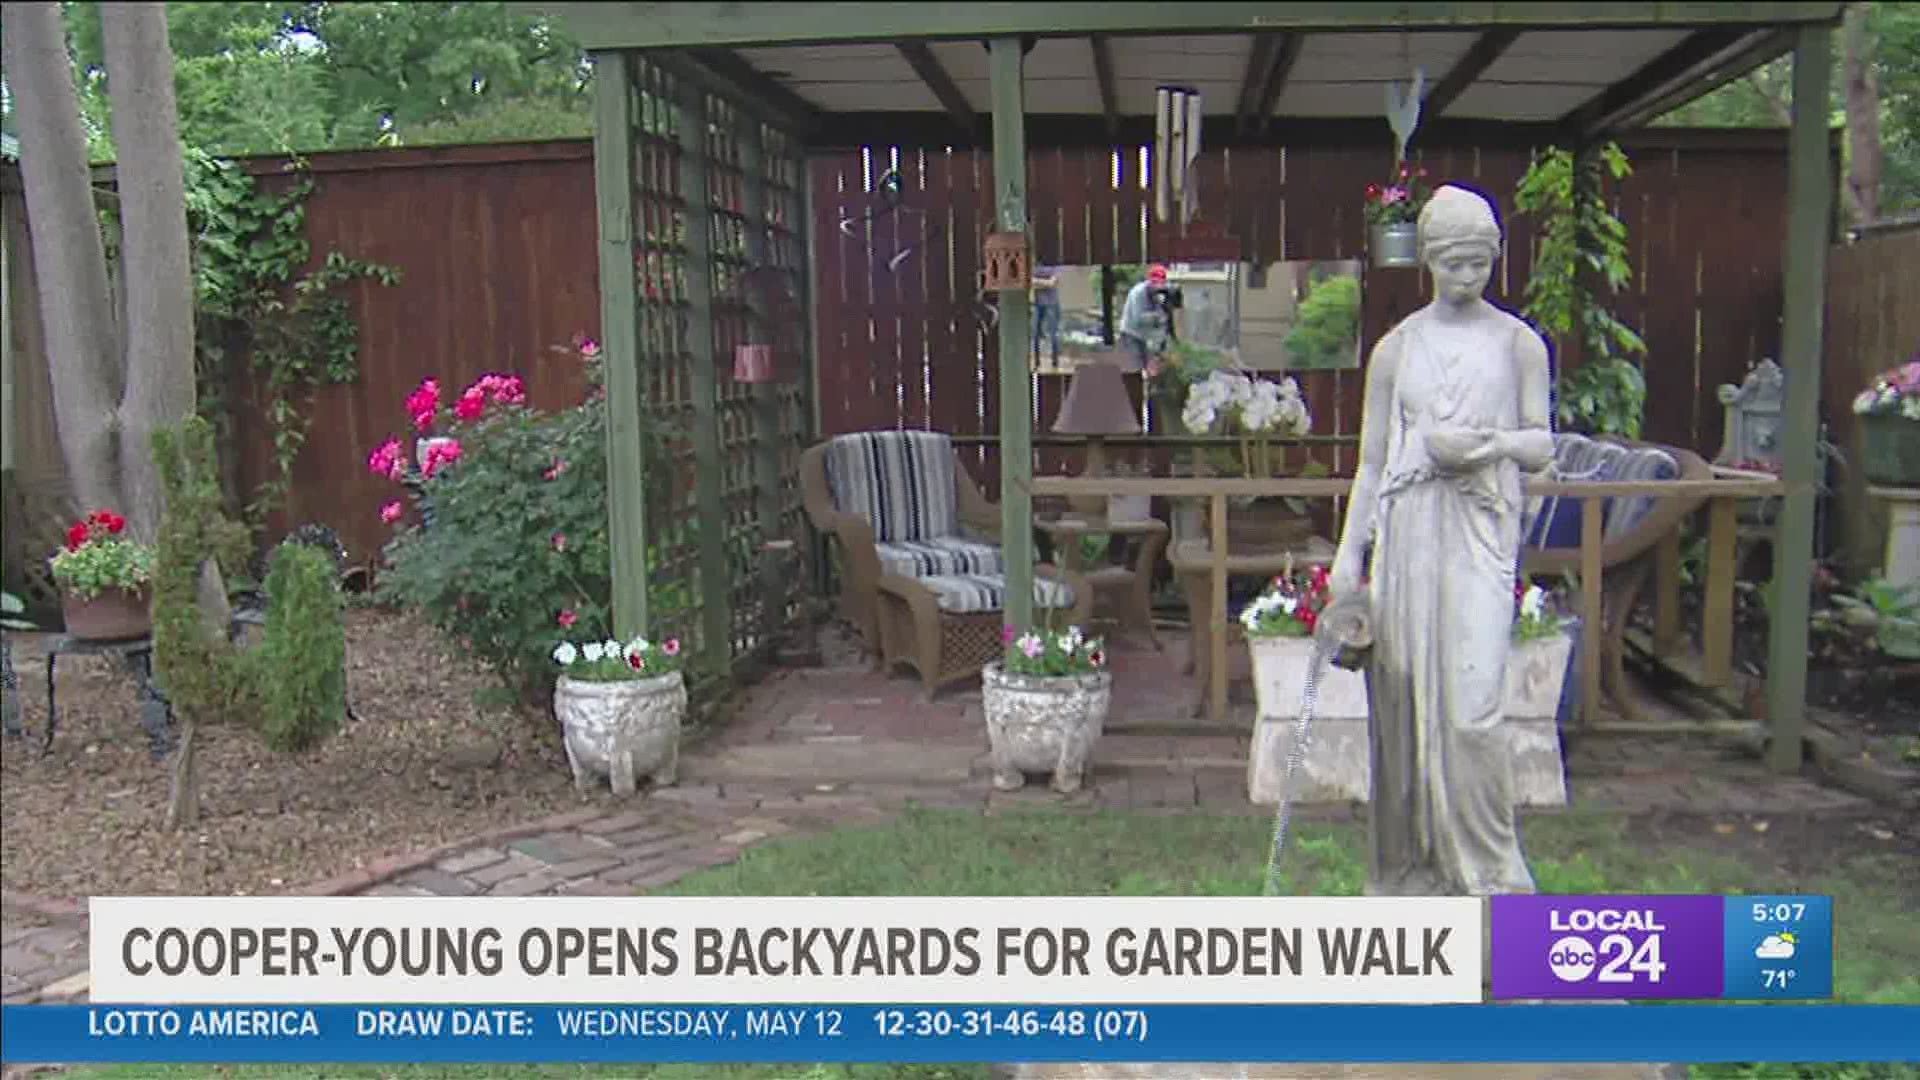 The Cooper-Young Garden Walk is returning for its 6th year this Saturday and Sunday.